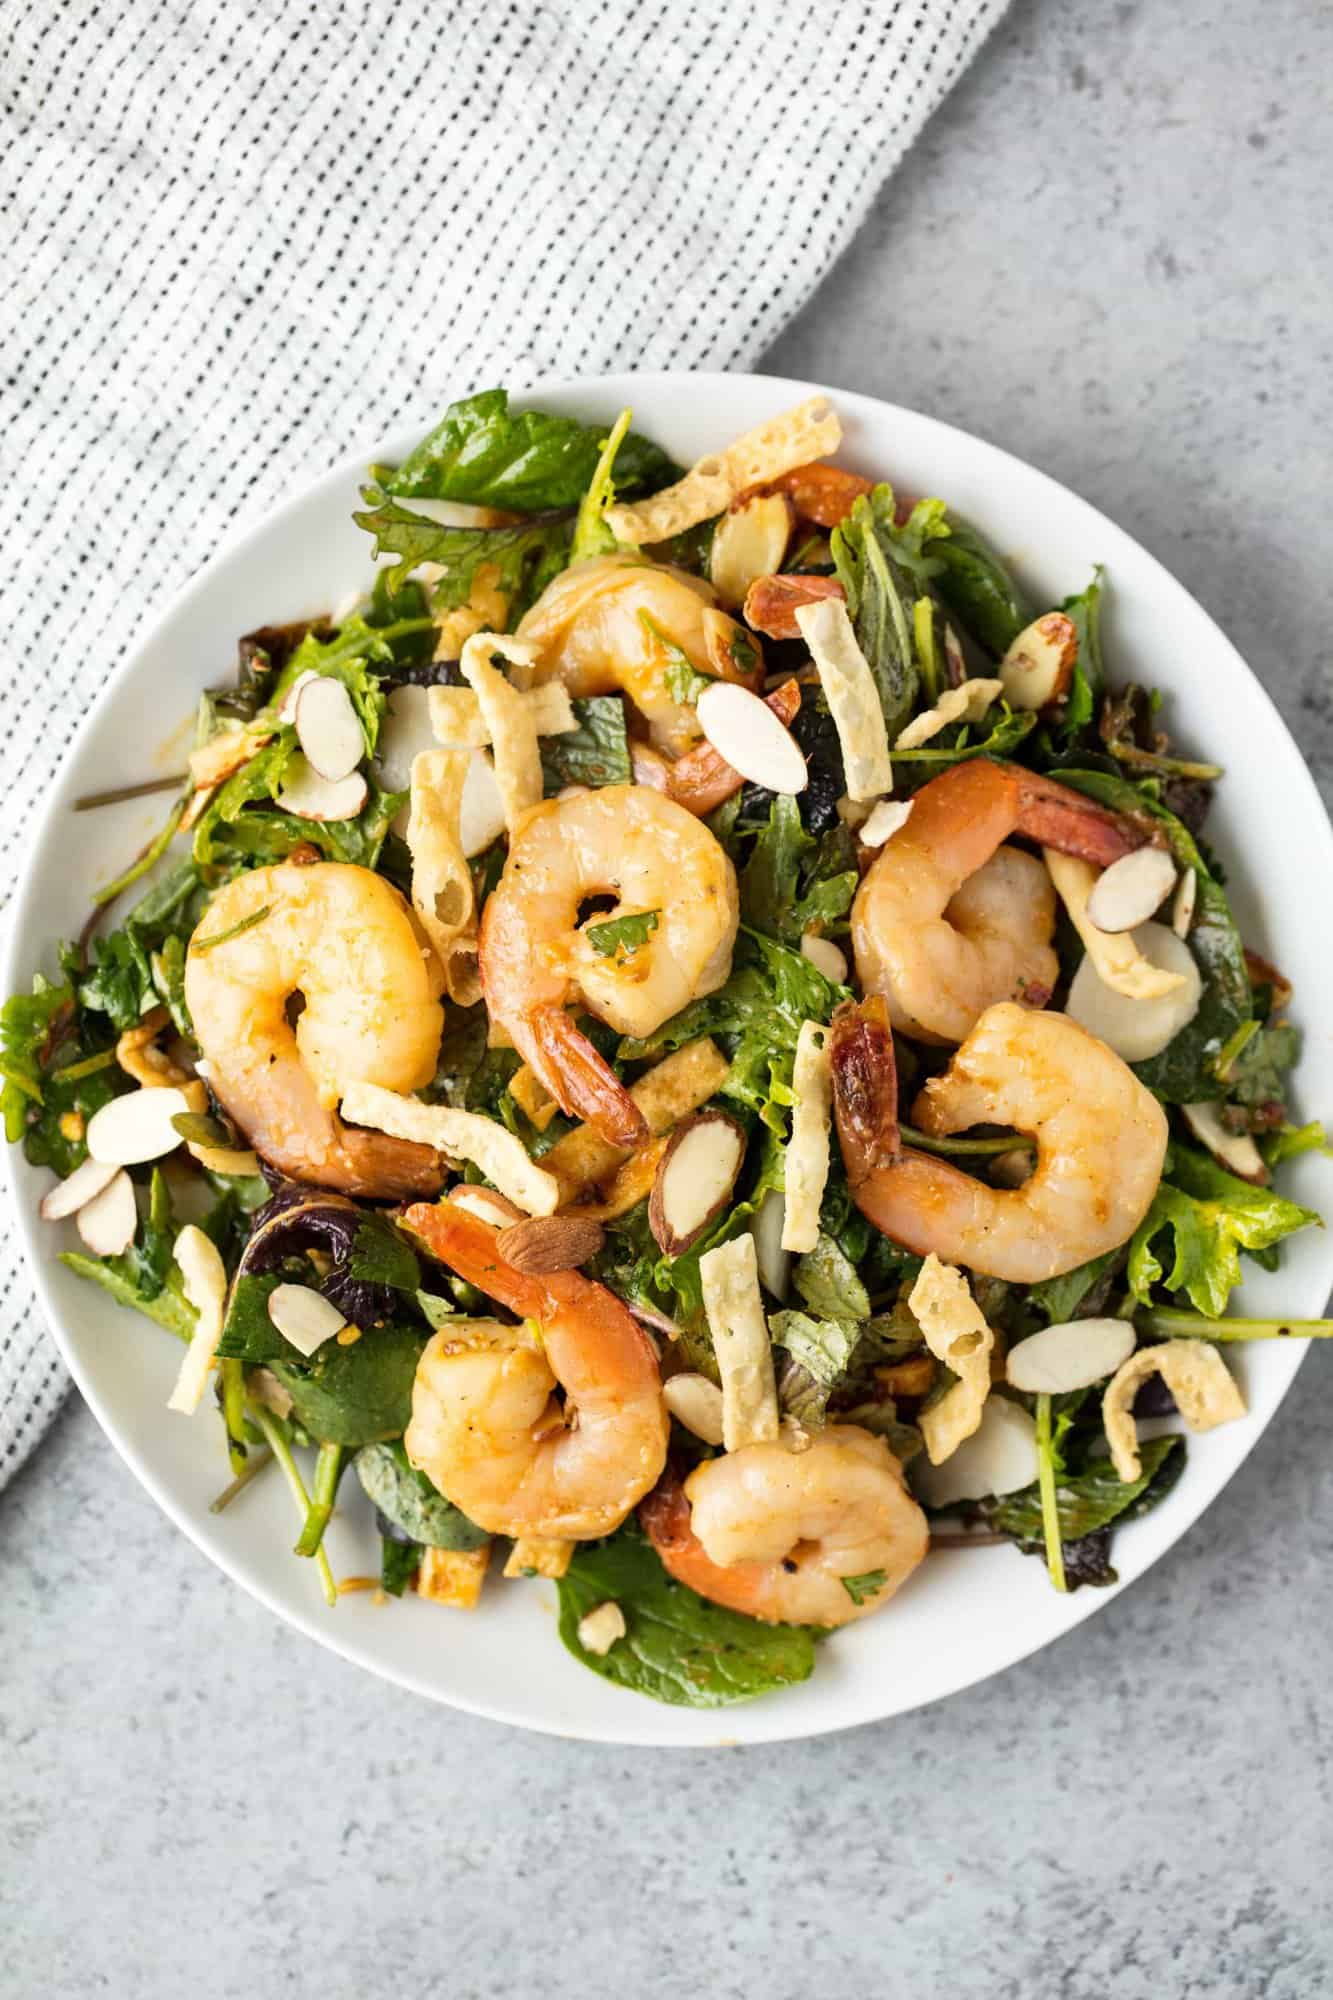 This easy Thai Shrimp Salad comes together in less than 15 minutes making it a great option for a weeknight meal. It's light, refreshing, and oh so tasty!